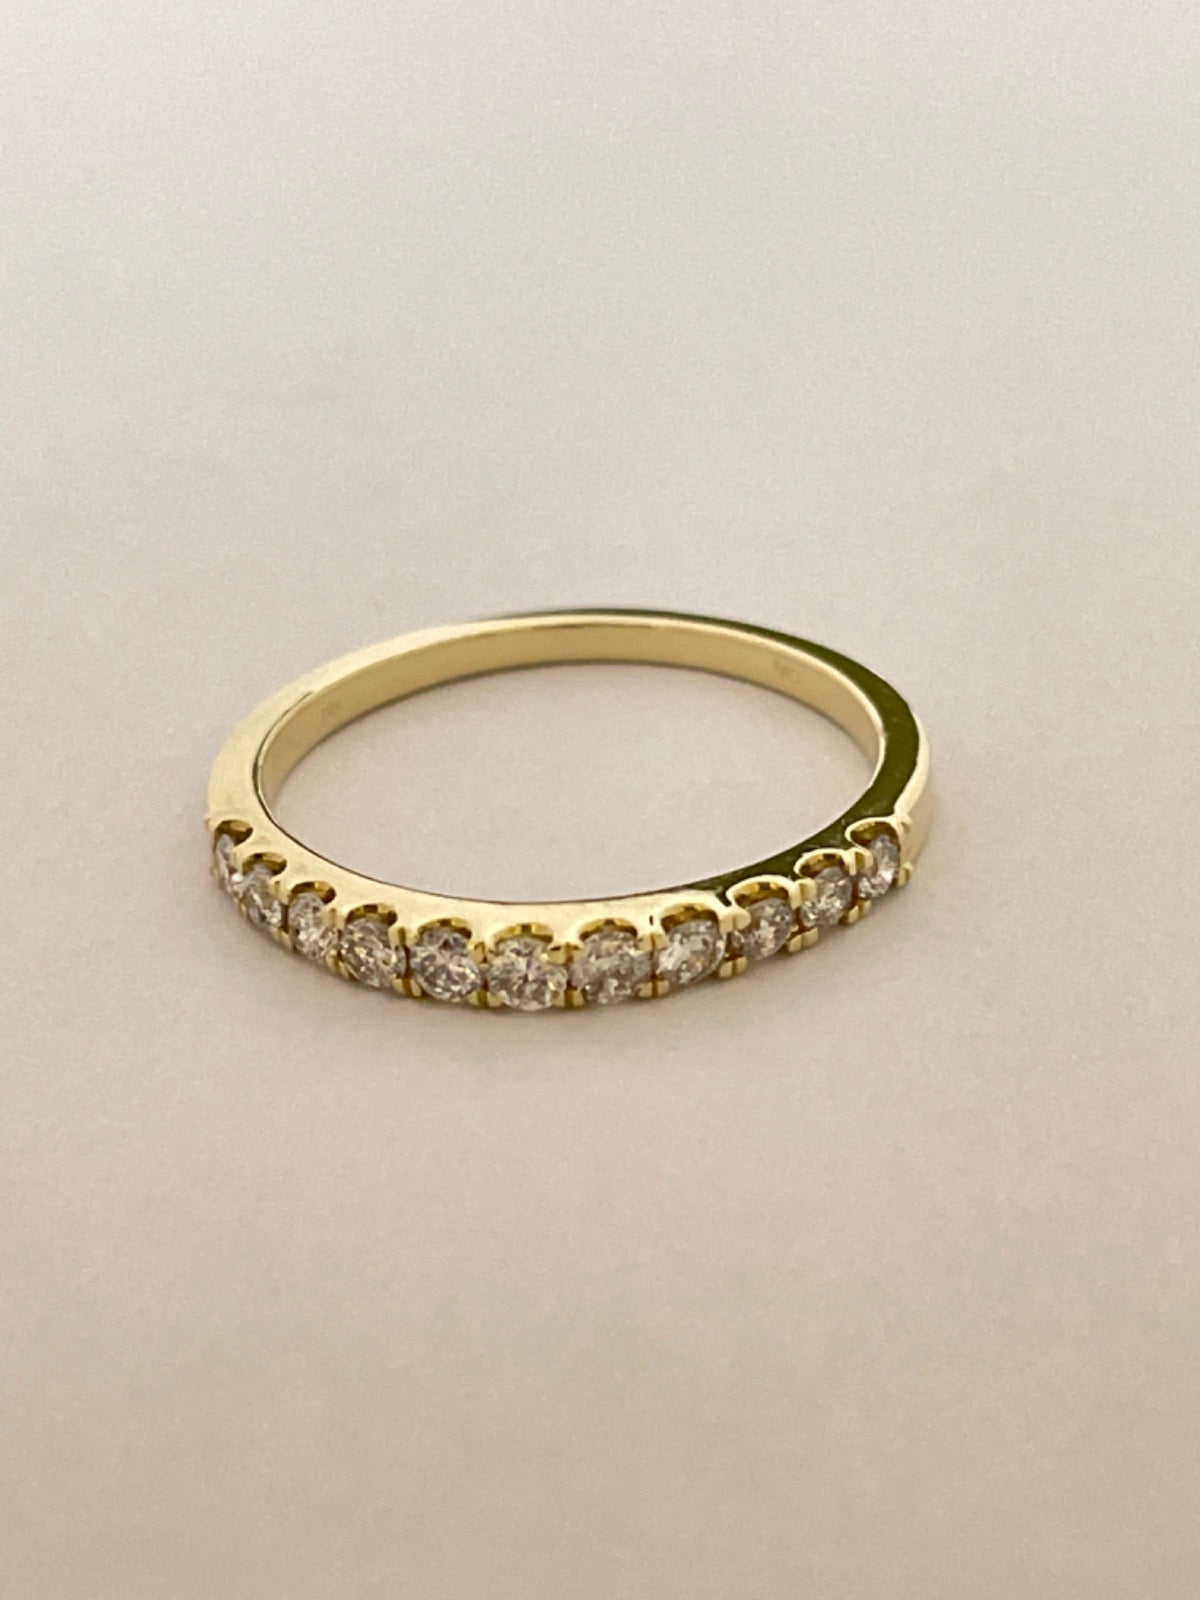 14K Yellow Gold Band Ring with Diamond